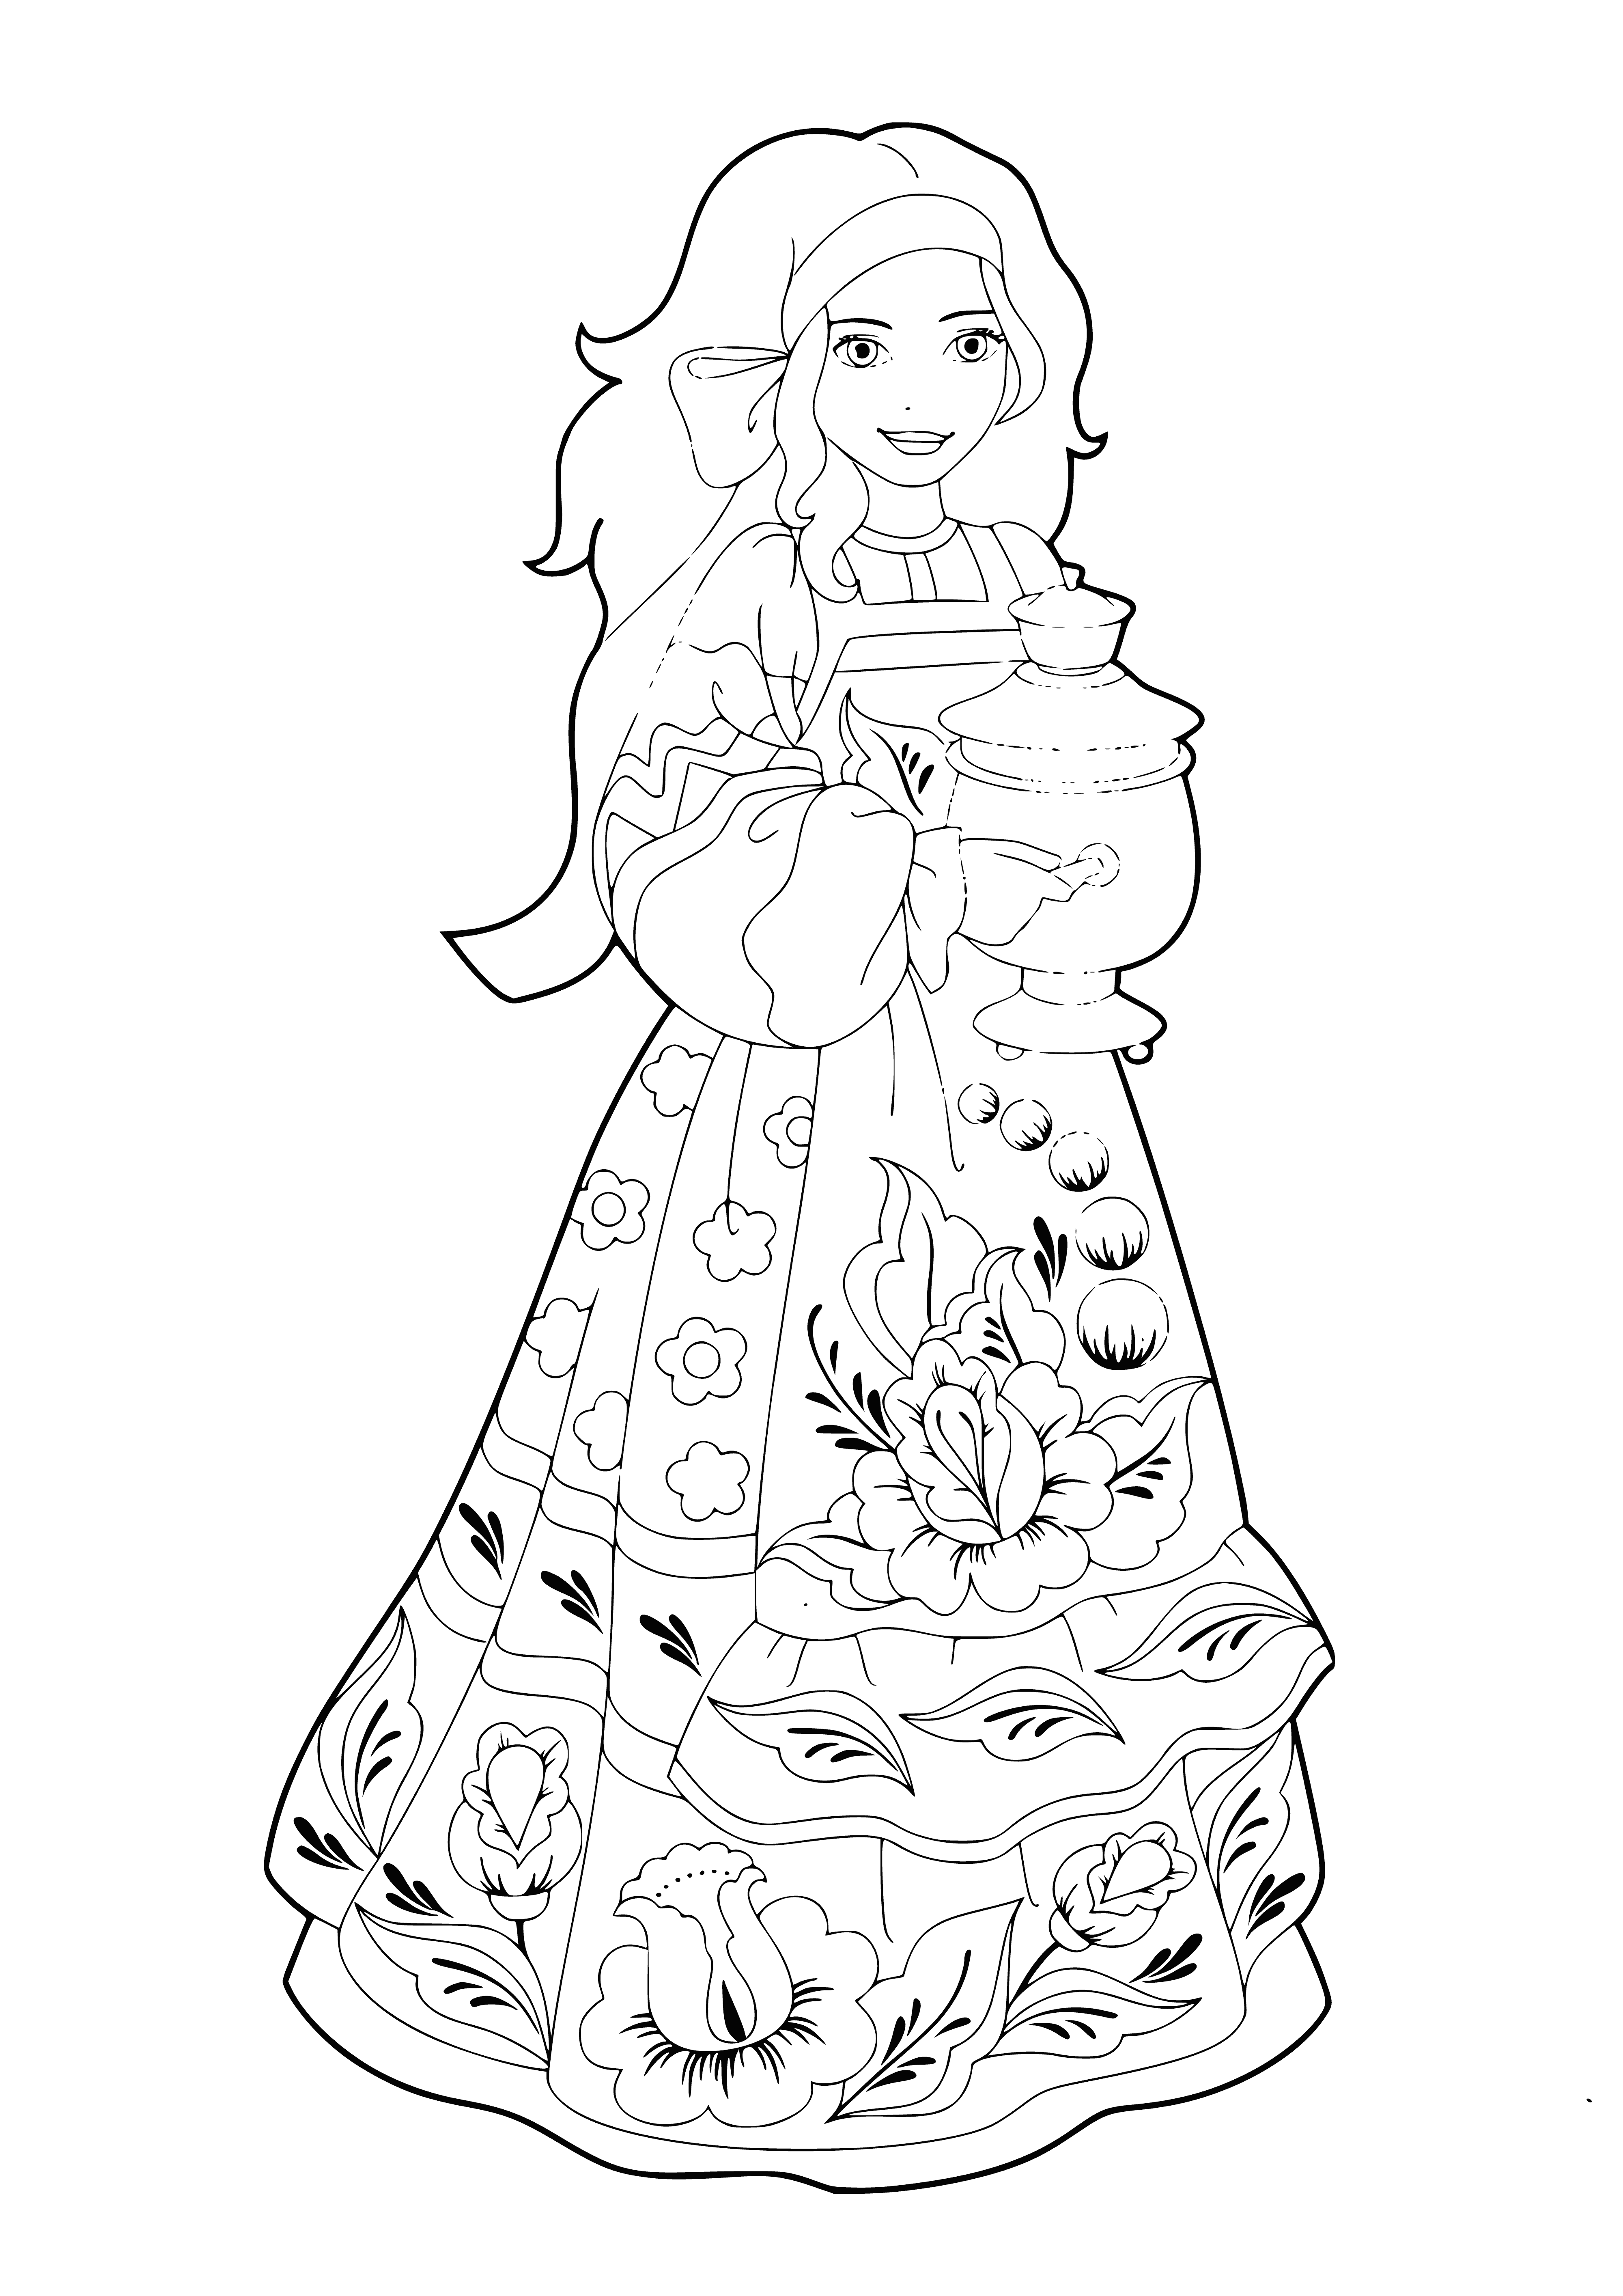 coloring page: Woman in traditional dress, smiling at viewer, stands next to samovar in Russian landscape.